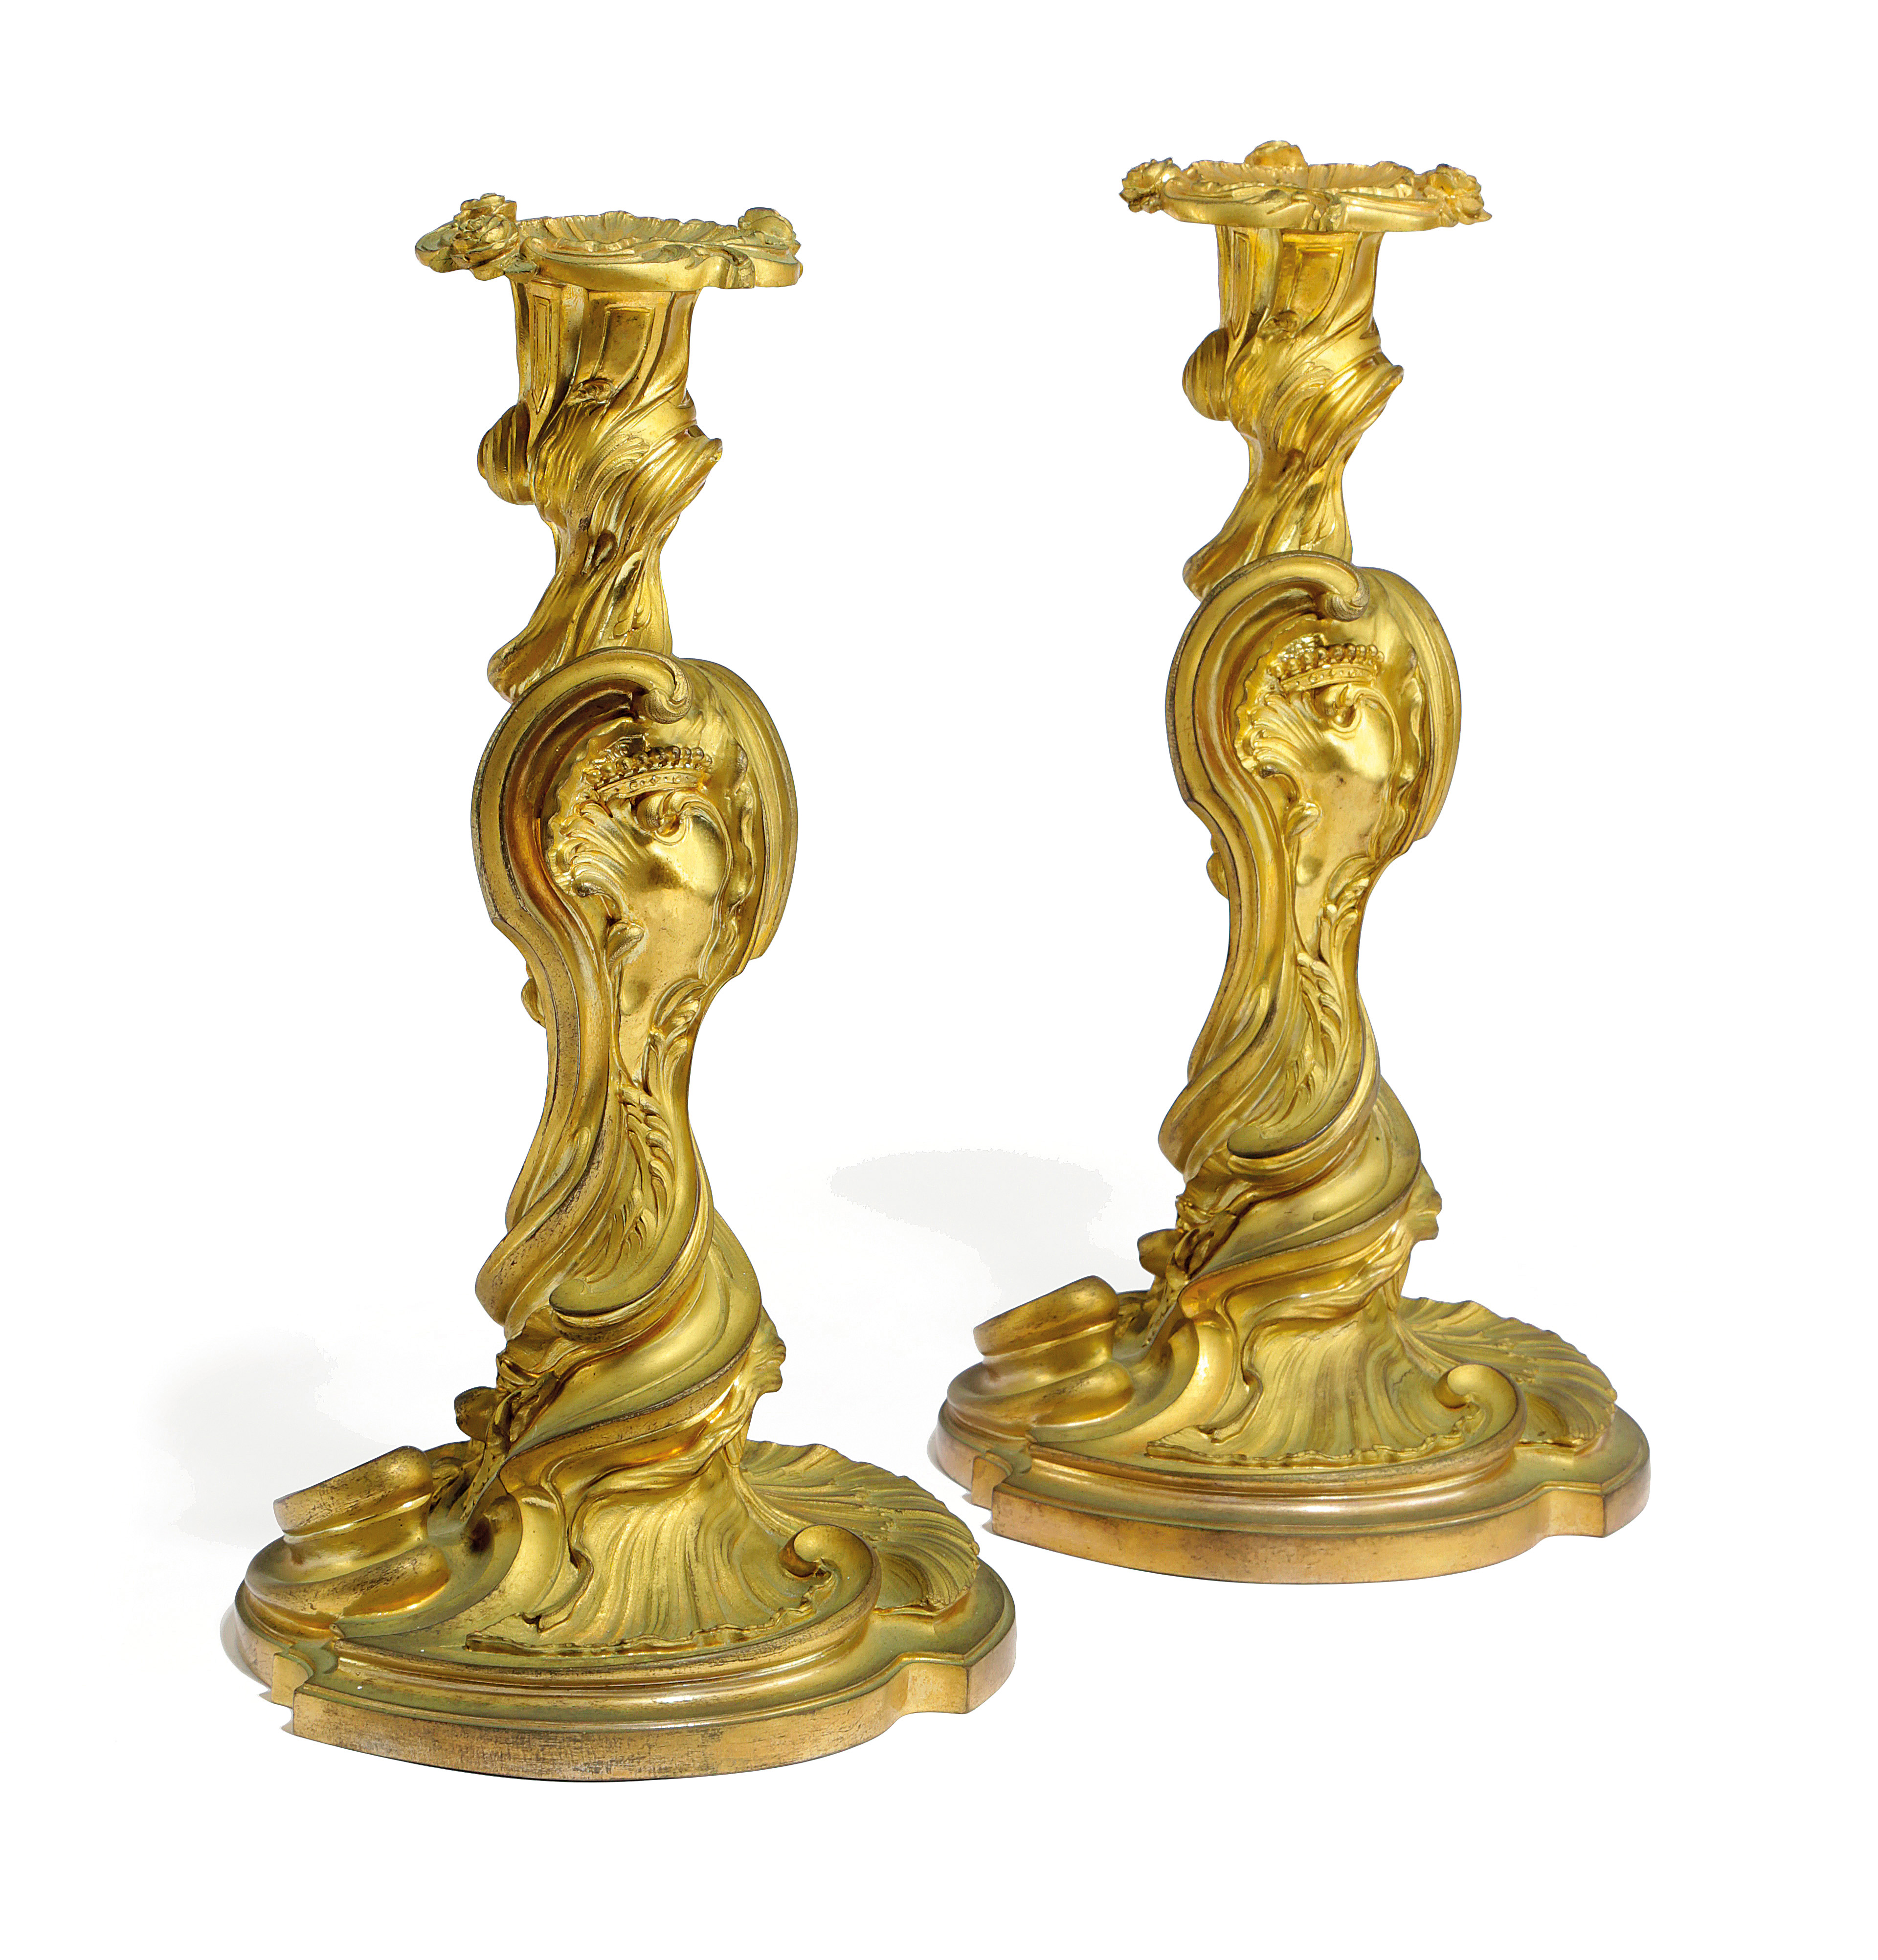 A PAIR OF FRENCH ORMOLU CANDLESTICKS IN LOUIS XV STYLE AFTER A DESIGN BY JUSTE-AURELE MEISSONNIER (